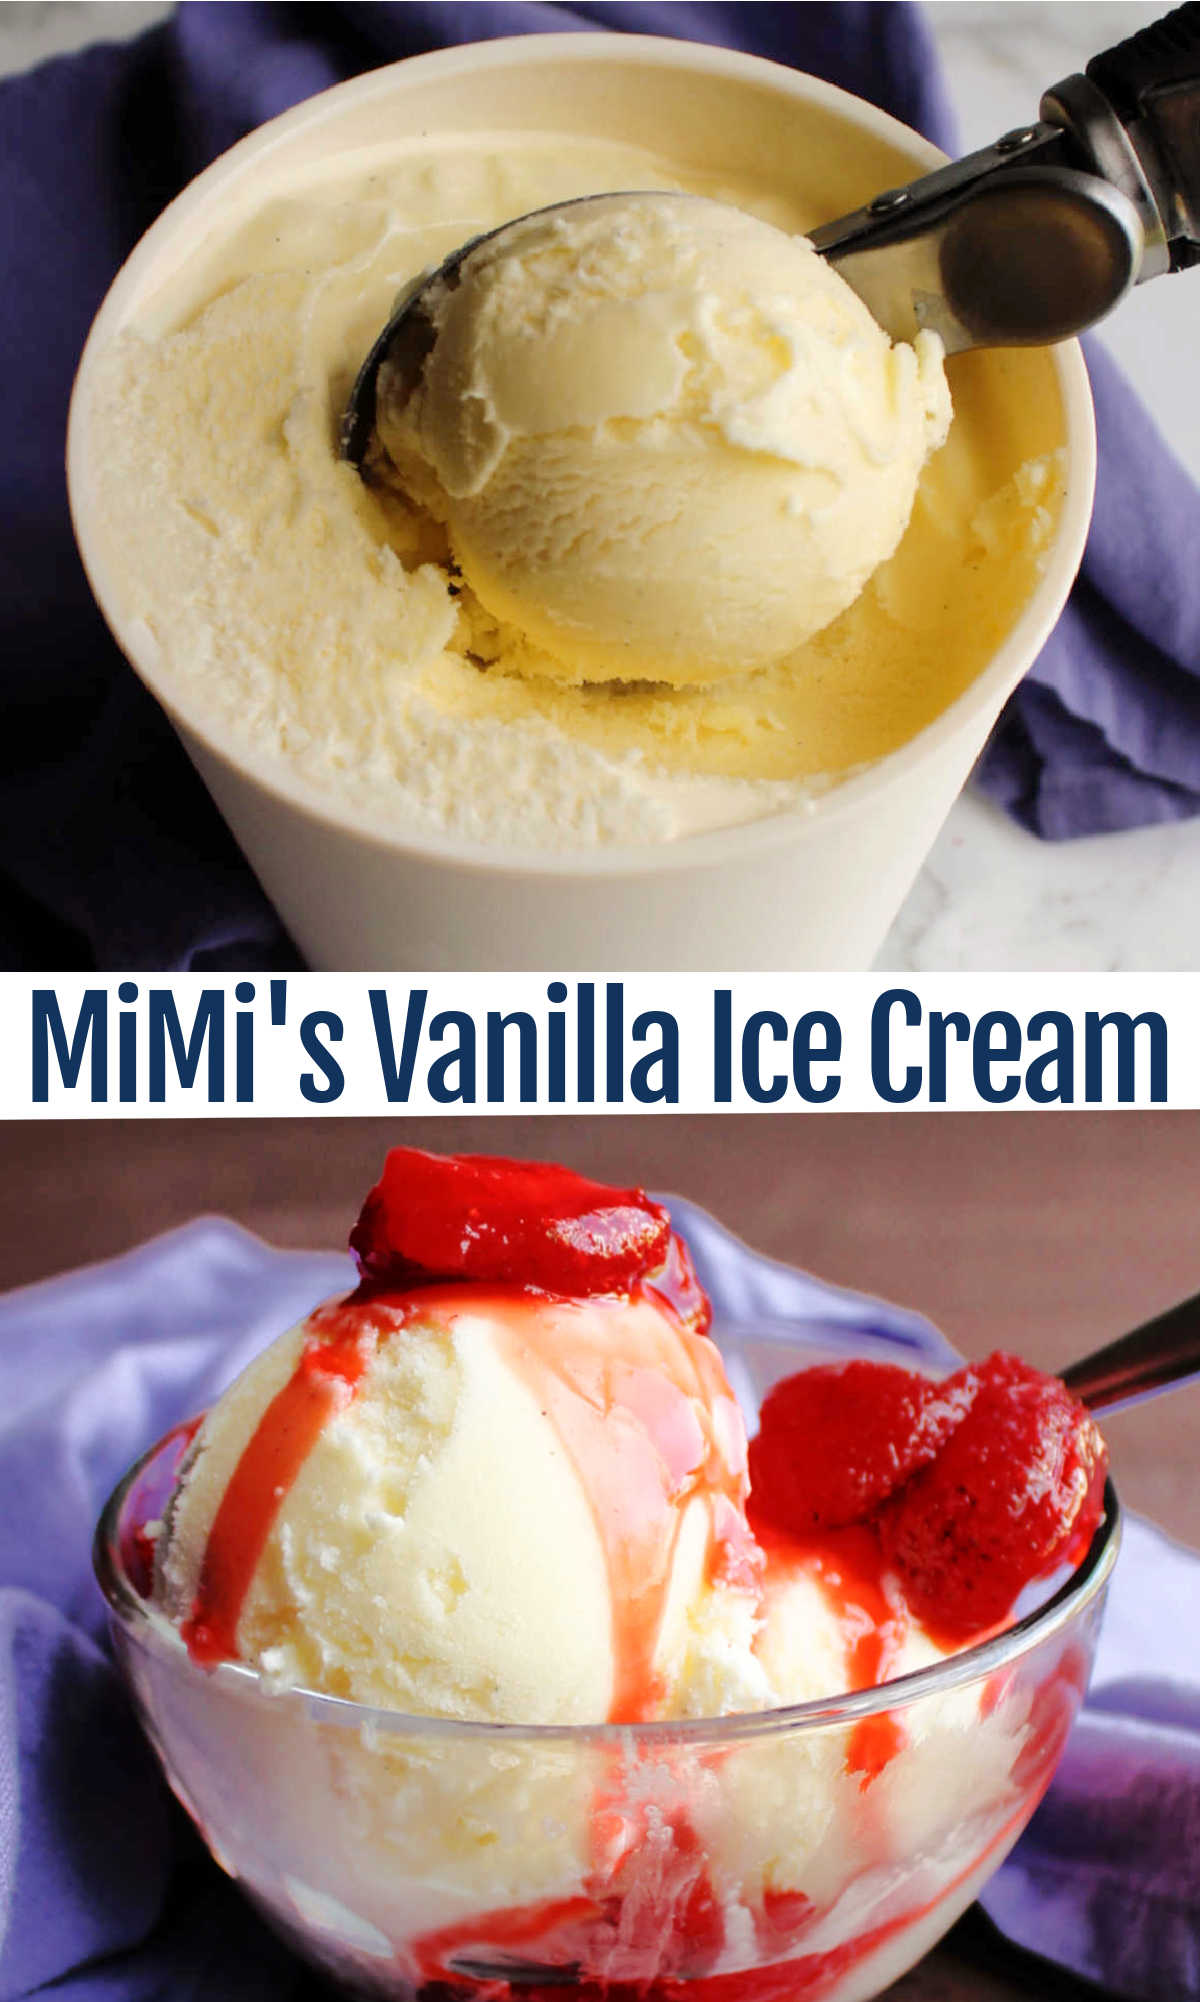 Rich, smooth creamy homemade vanilla ice cream is a perfect treat. It stands on its own as a great dessert and makes almost any pie, cake, cobbler, or crunch better. This recipe from MiMi is our favorite.